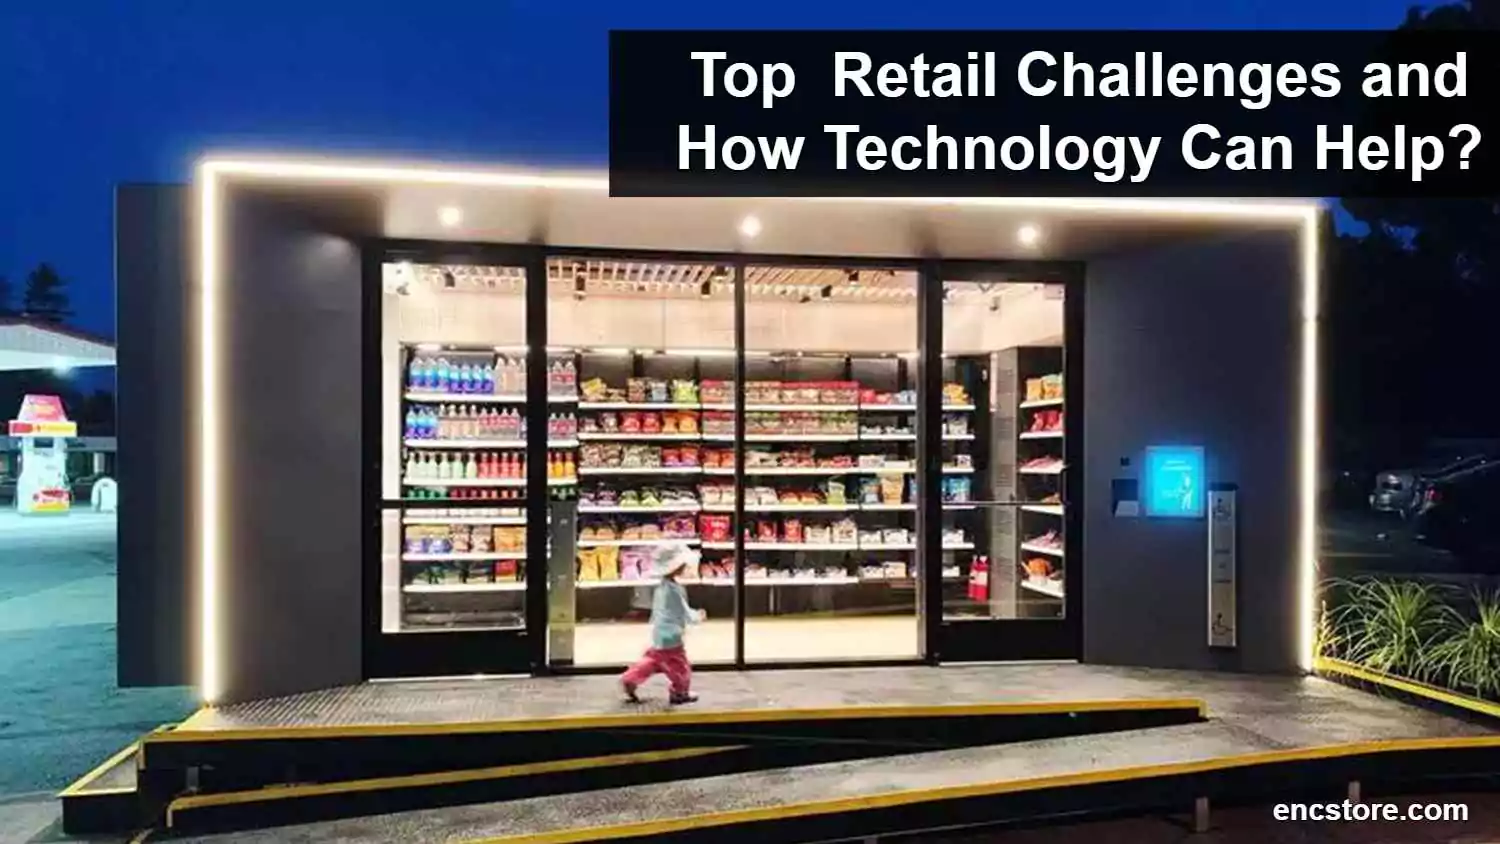 Top Retail Challenges and How Technology Can Help